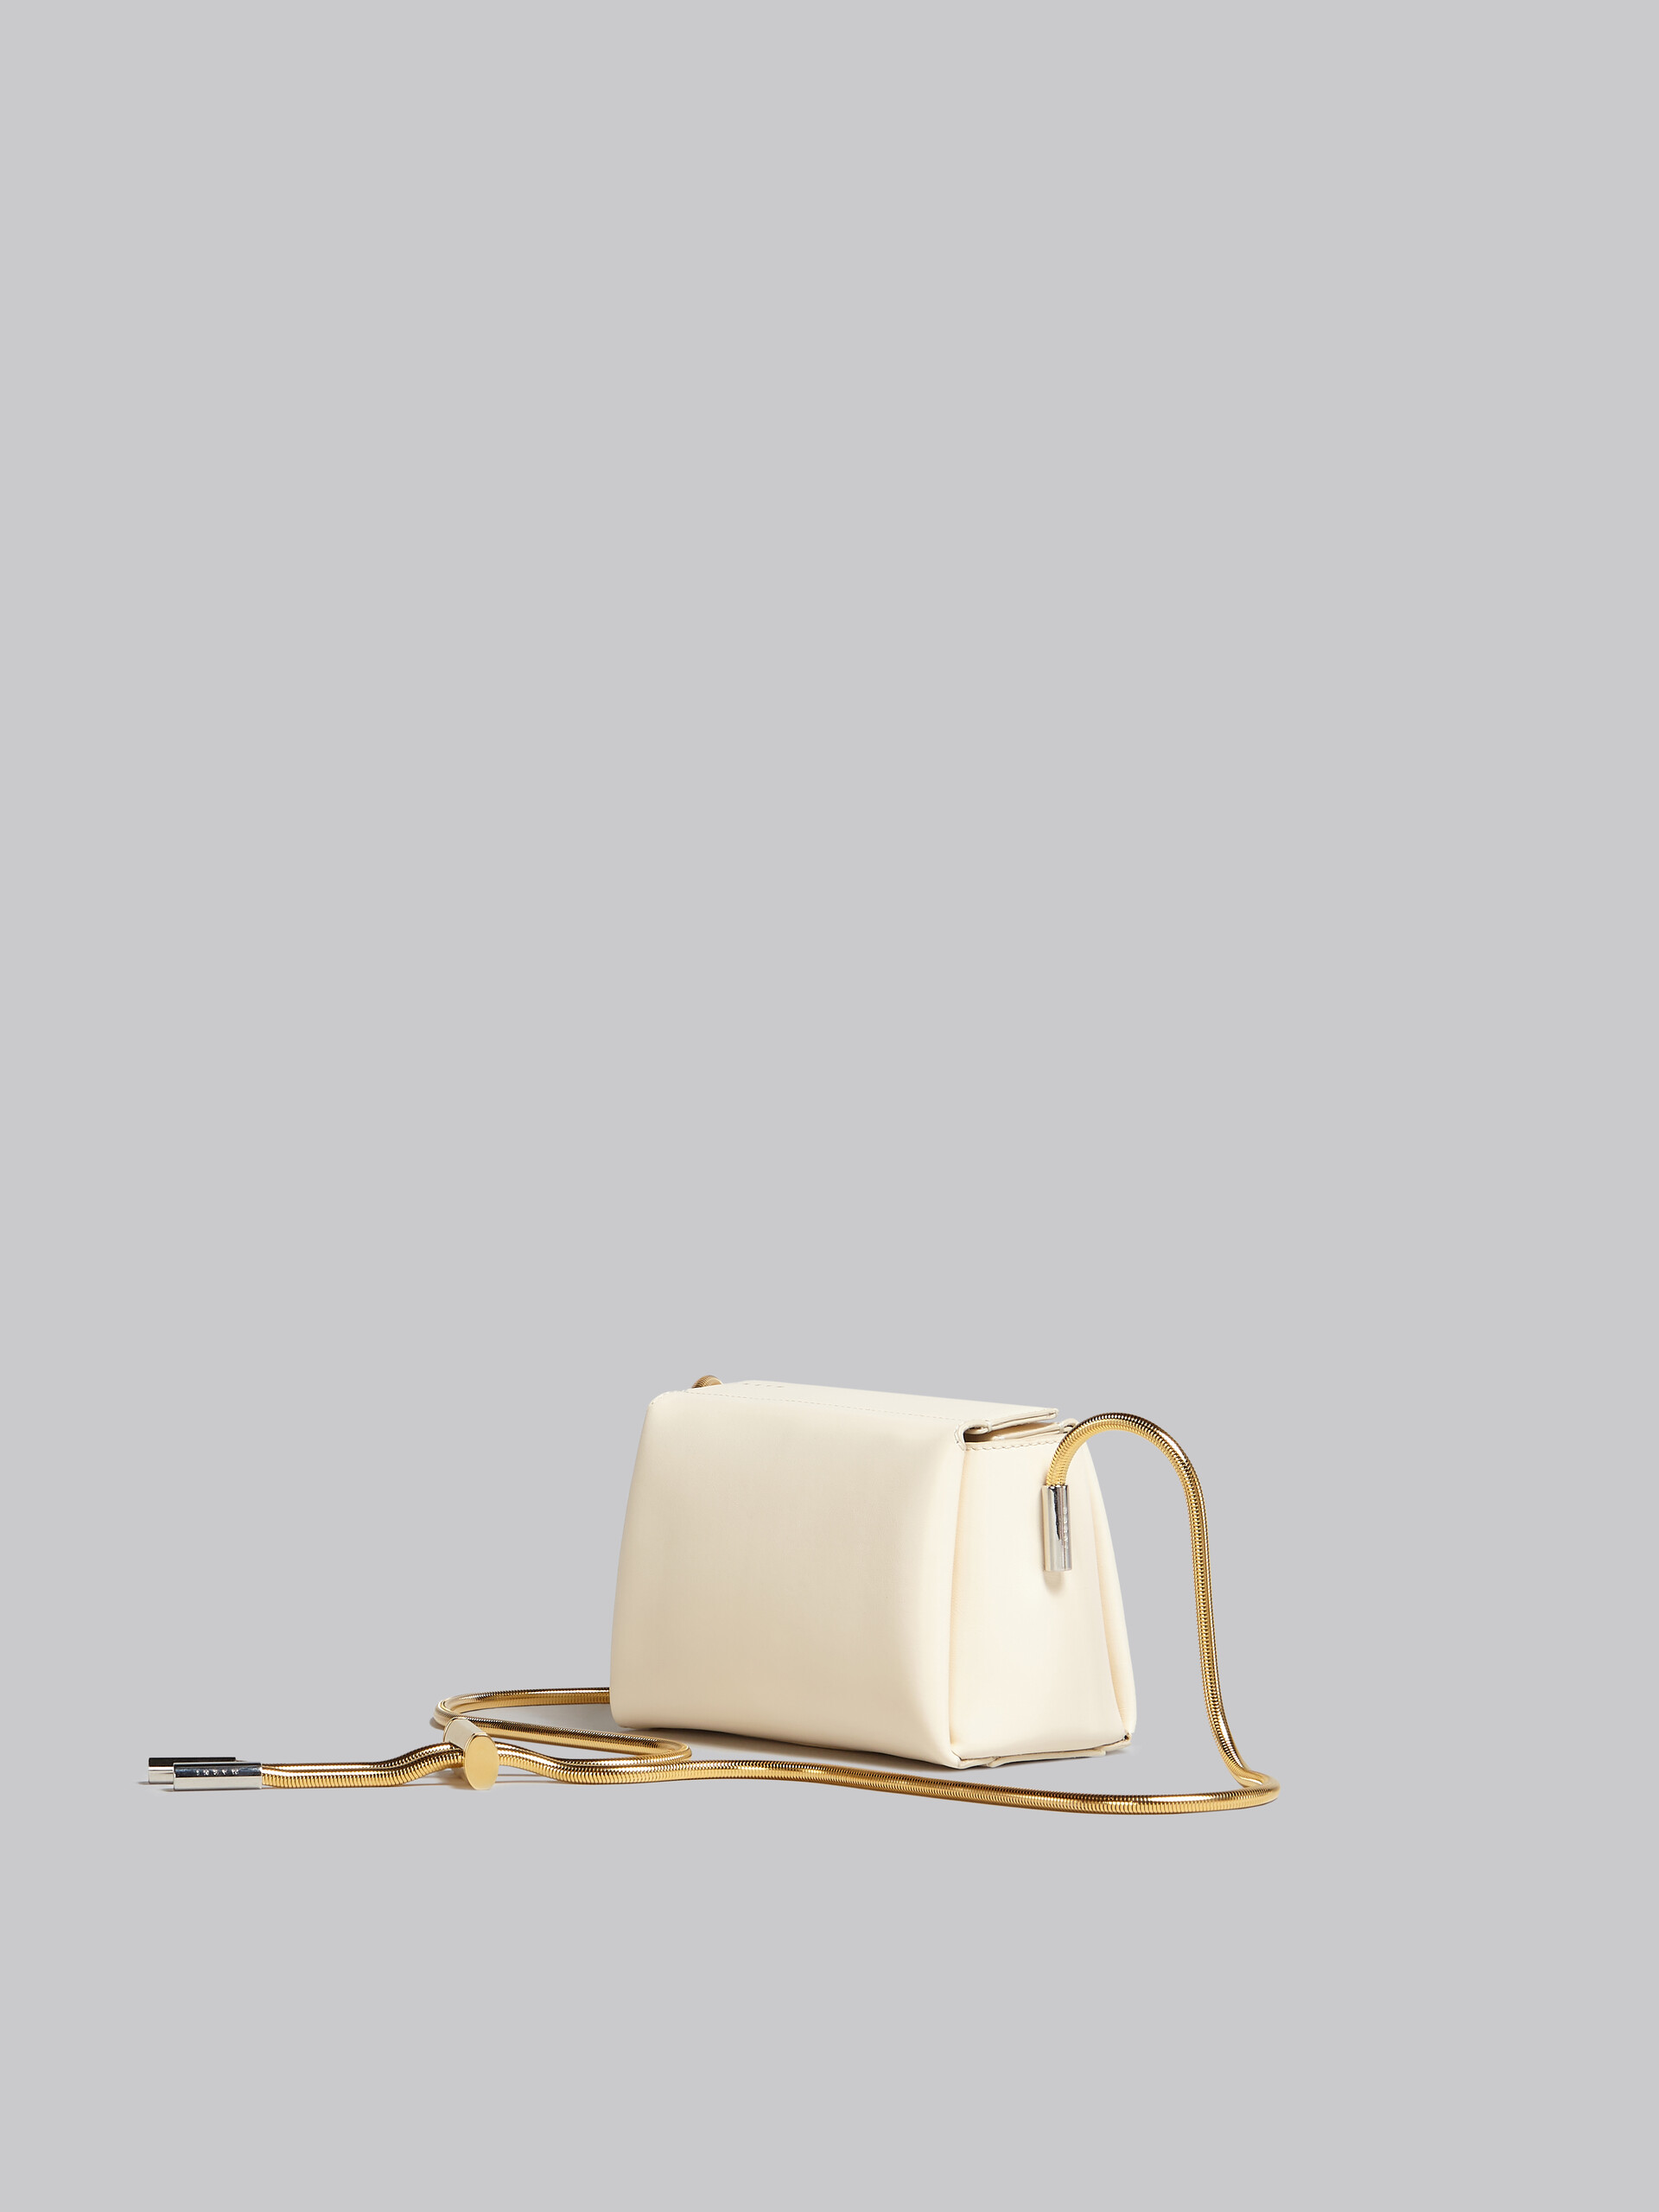 Toggle Small Bag in ivory white leather - Shoulder Bag - Image 2